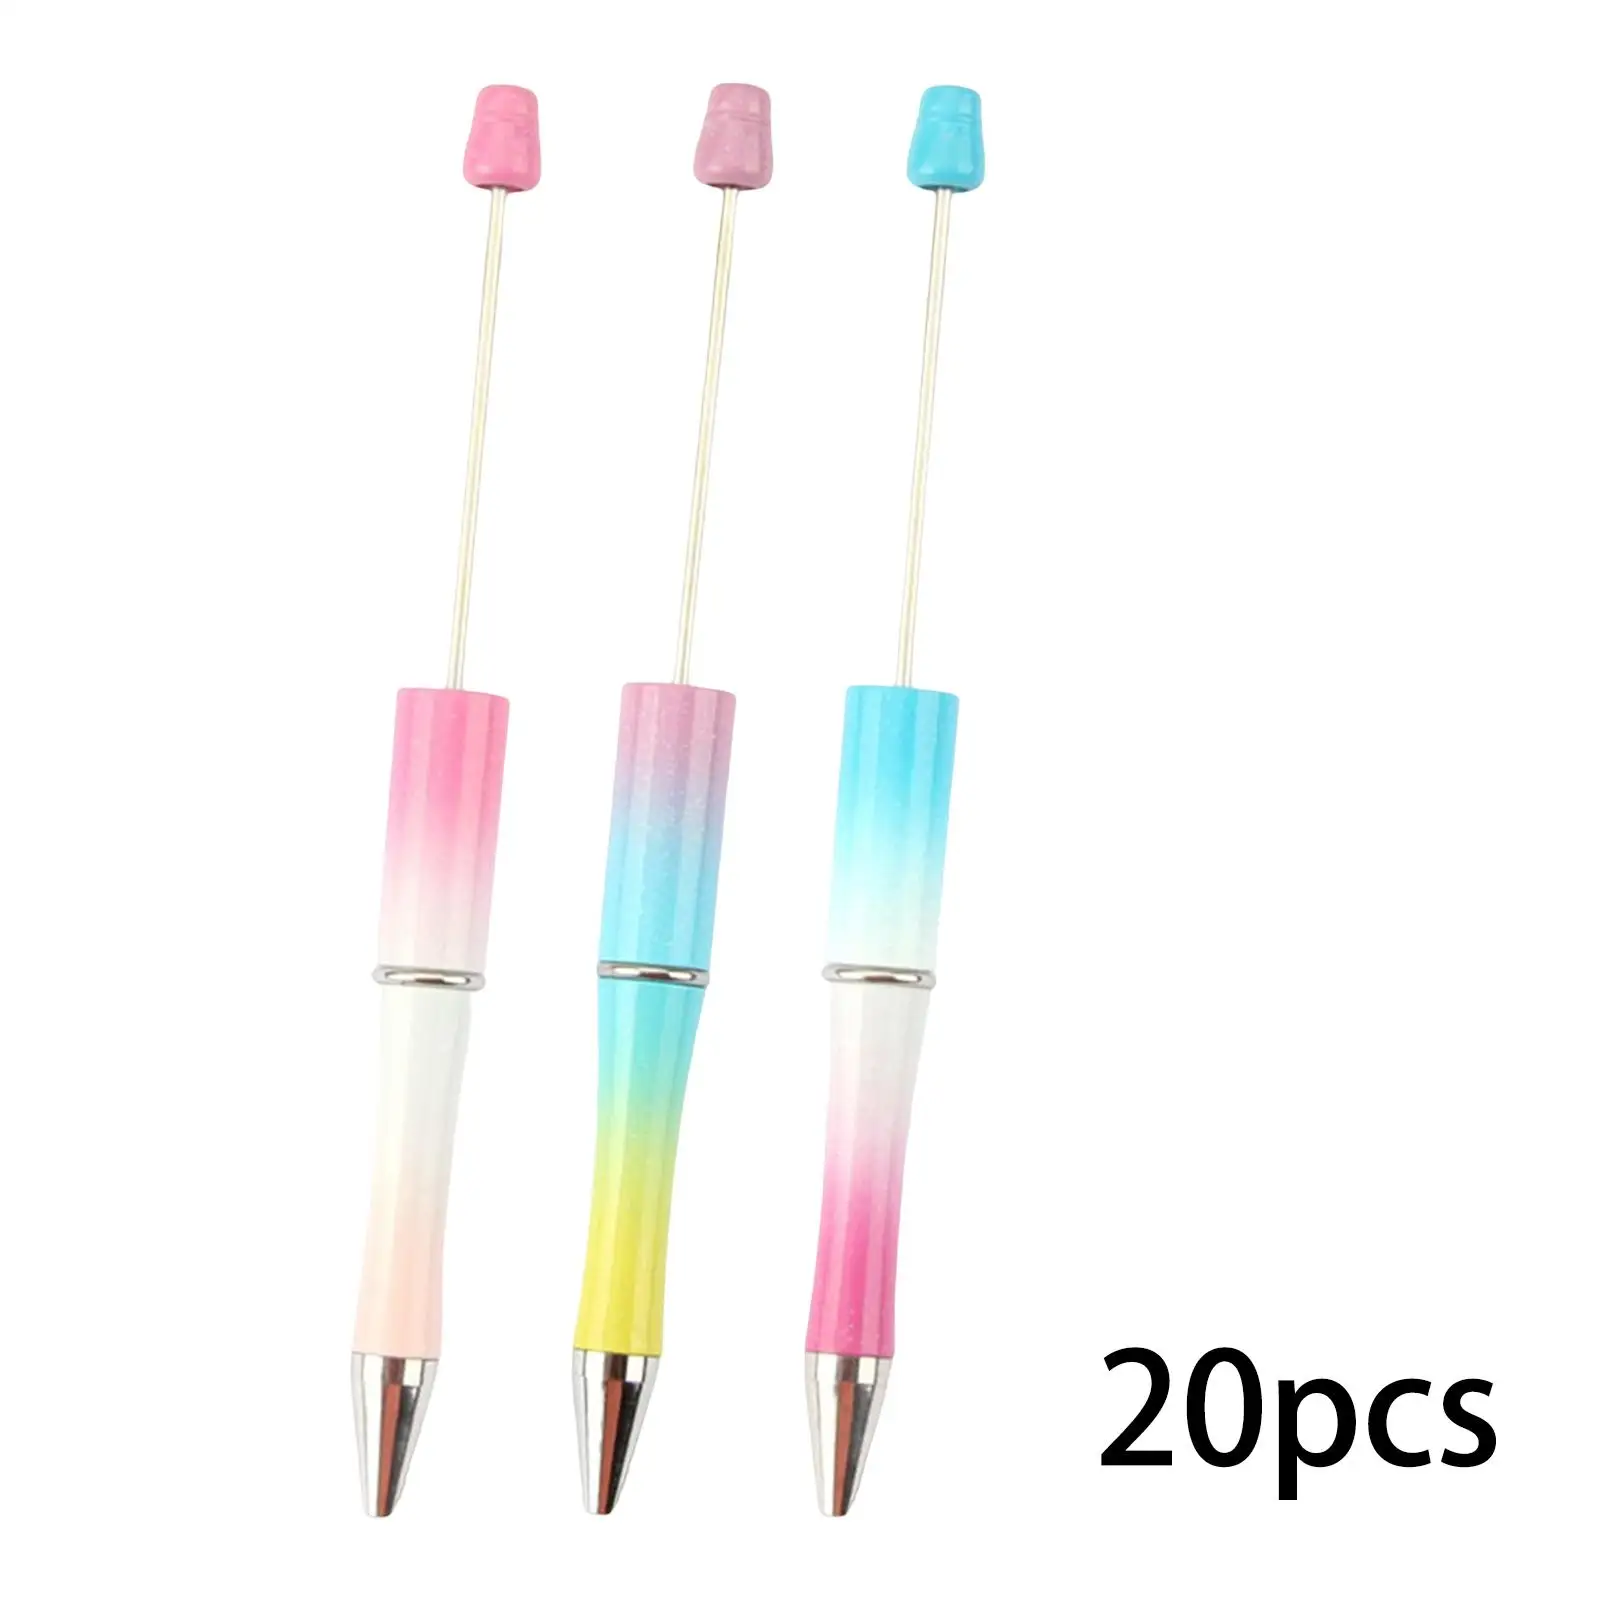 20x Beadable Pens Kit DIY Ball Pen Ballpoint Pen for School Drawing Students Gifts